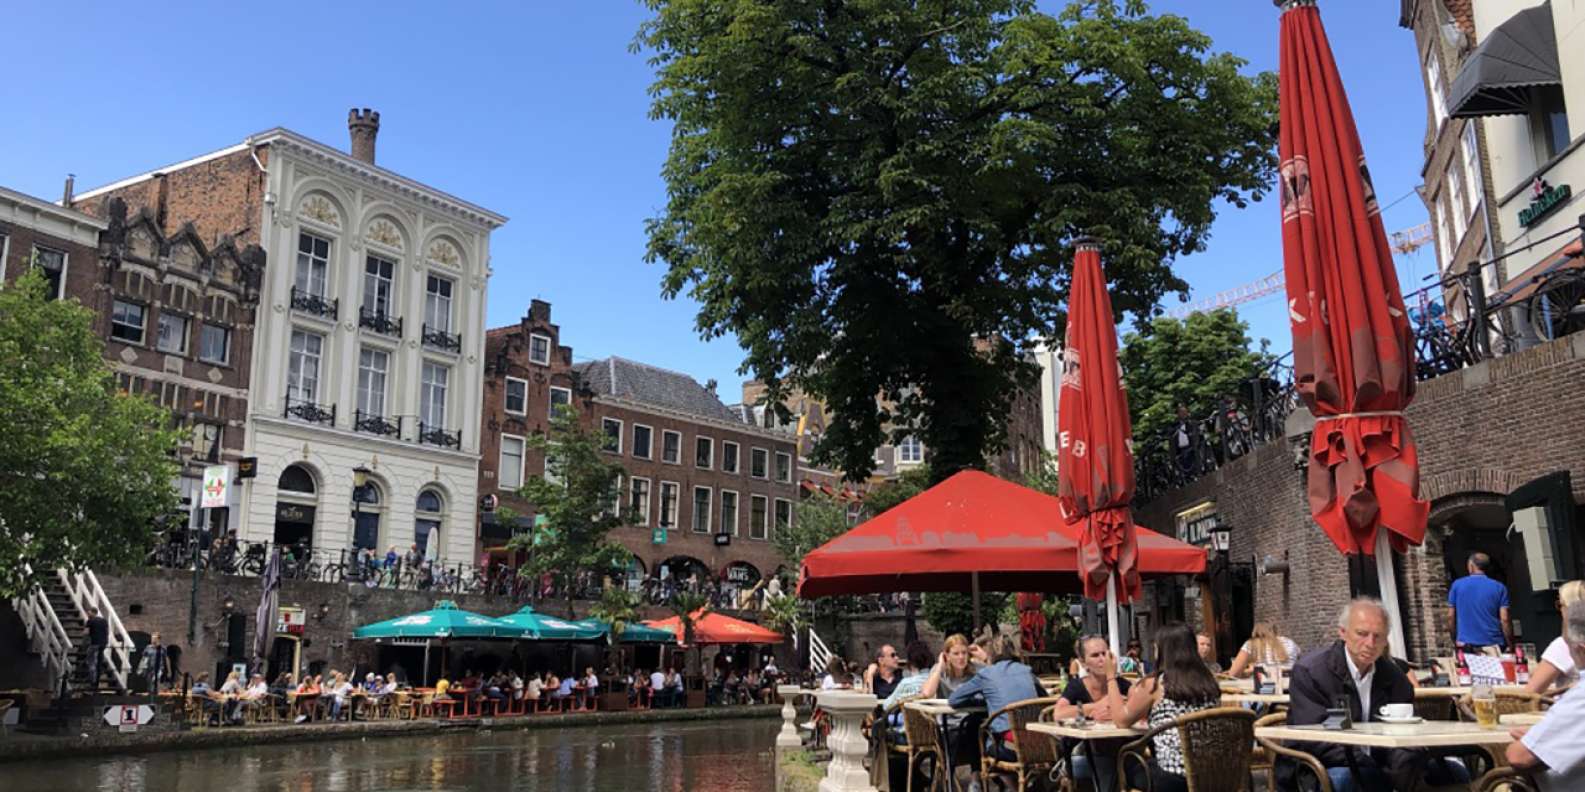 things to do in Haarlem